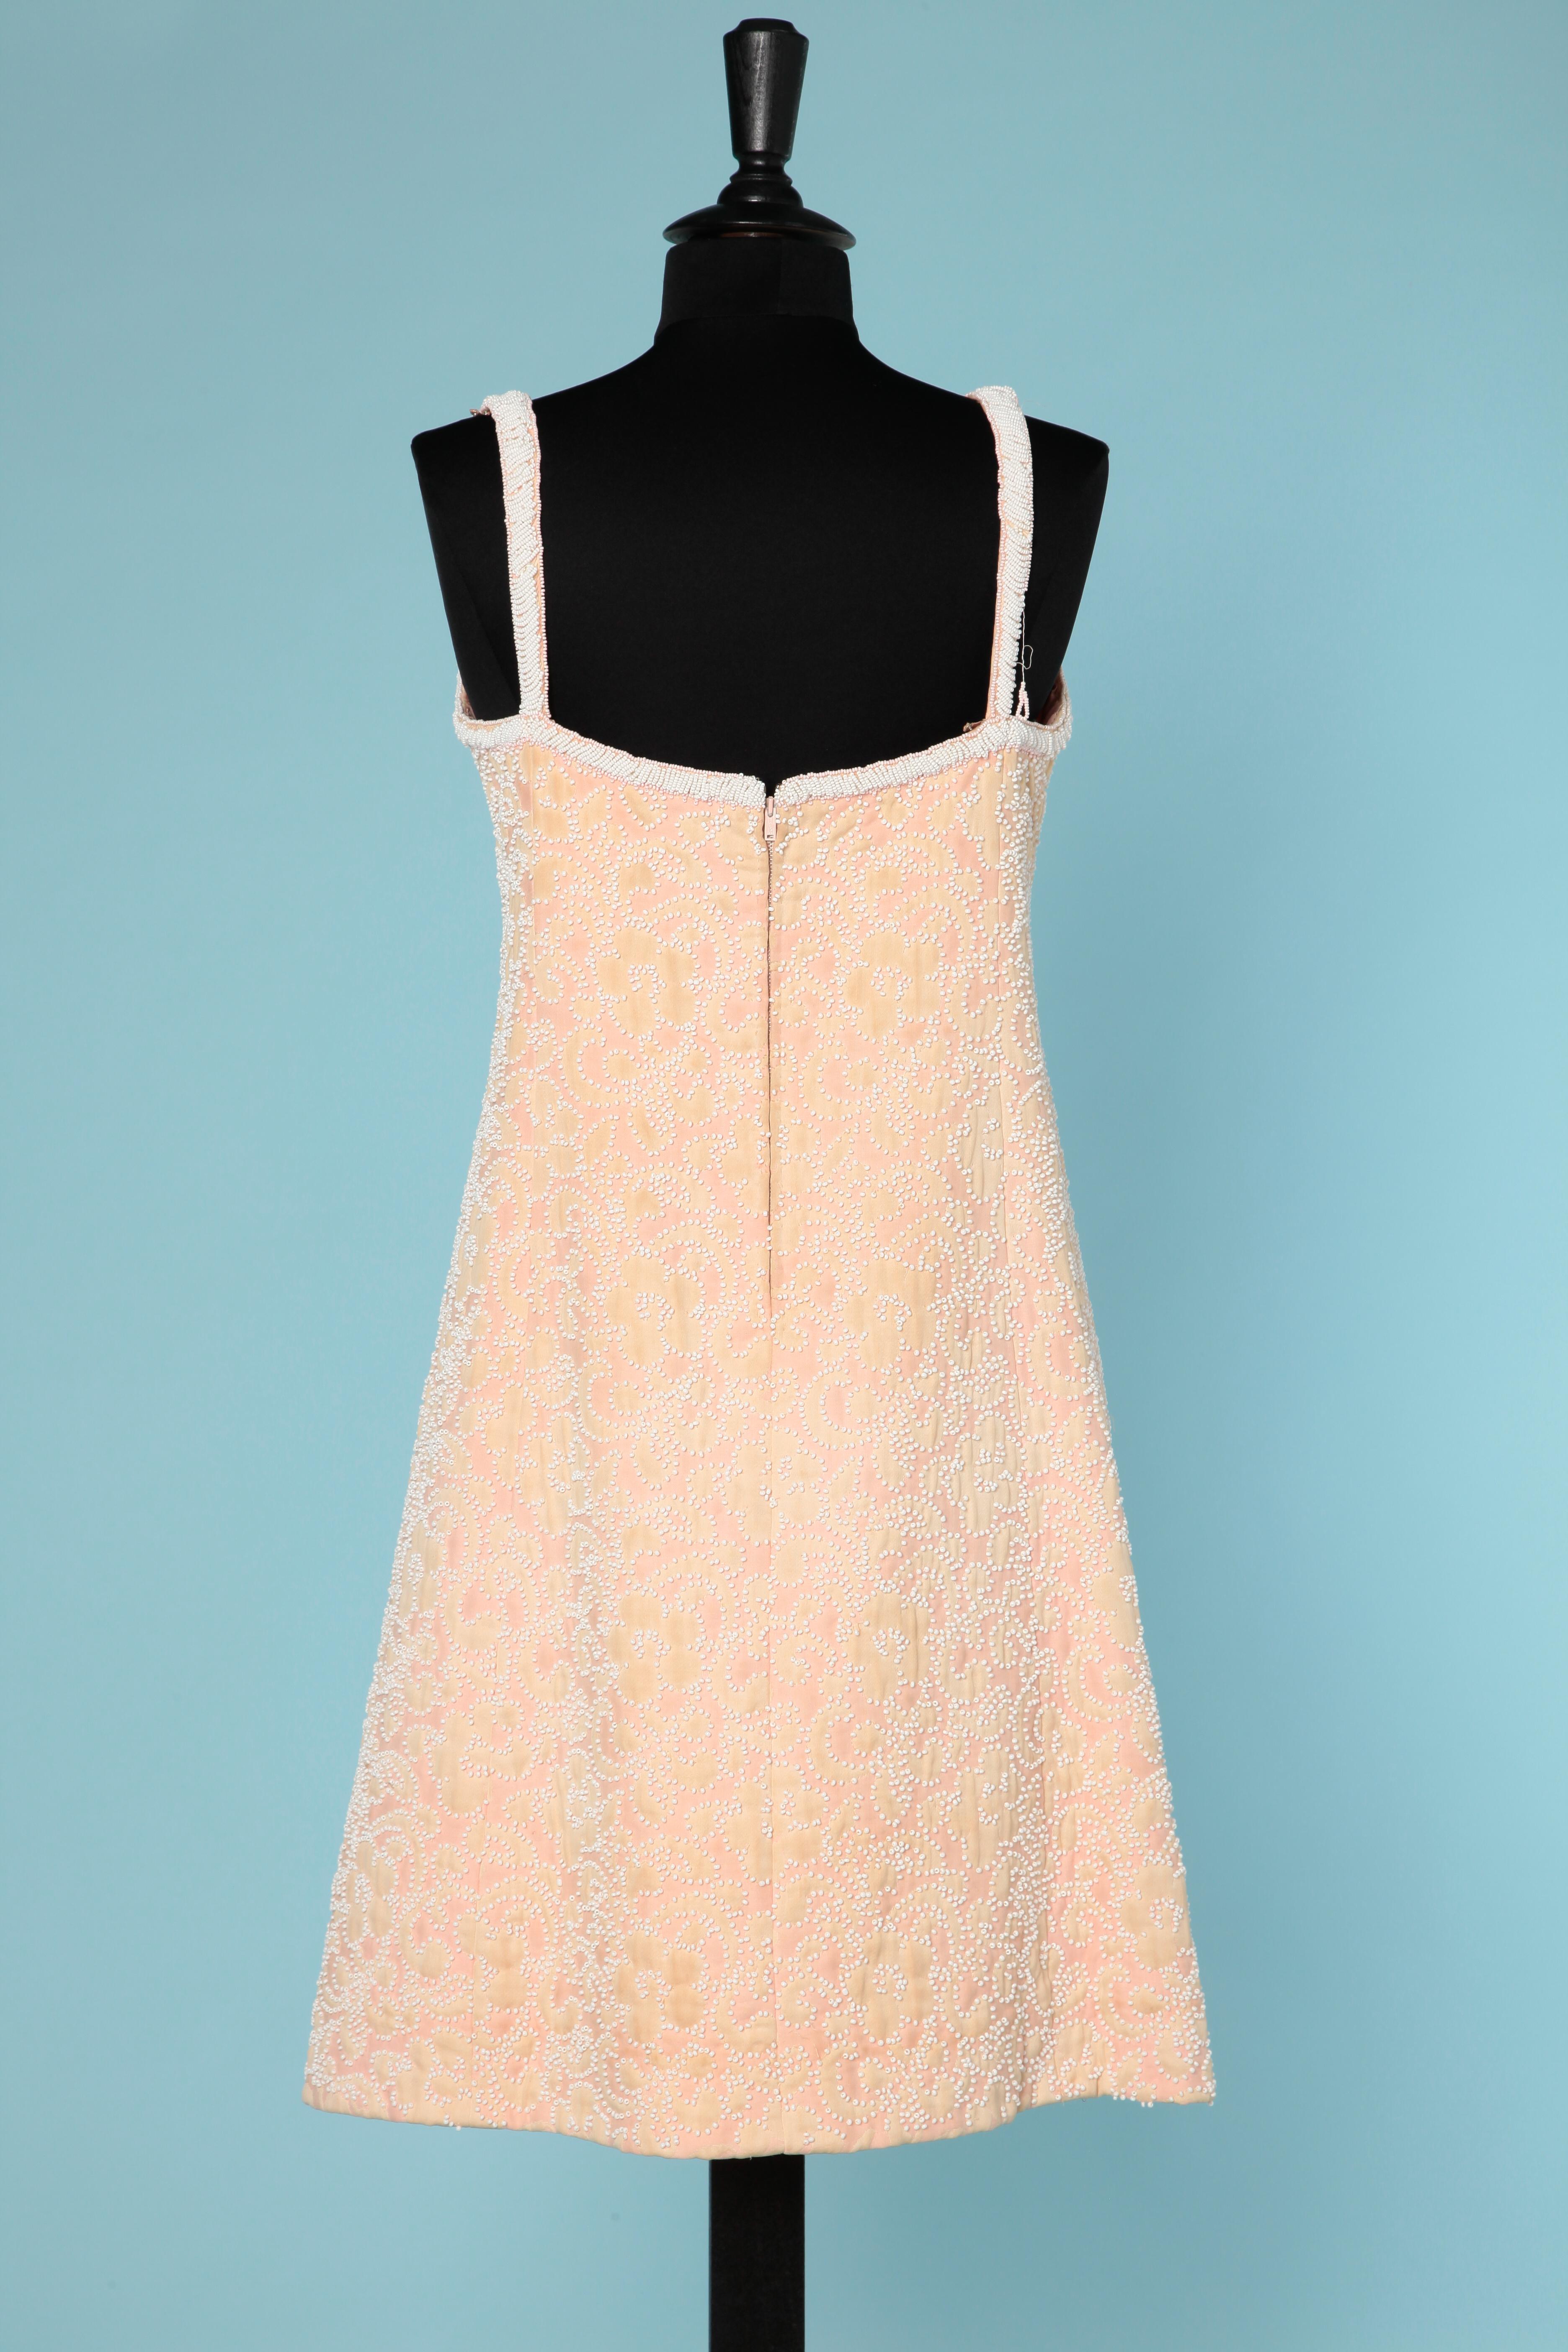 Beige and pale pink beaded cocktail dress Bergdorf Goodman On the Plaza 1967 In Excellent Condition For Sale In Saint-Ouen-Sur-Seine, FR